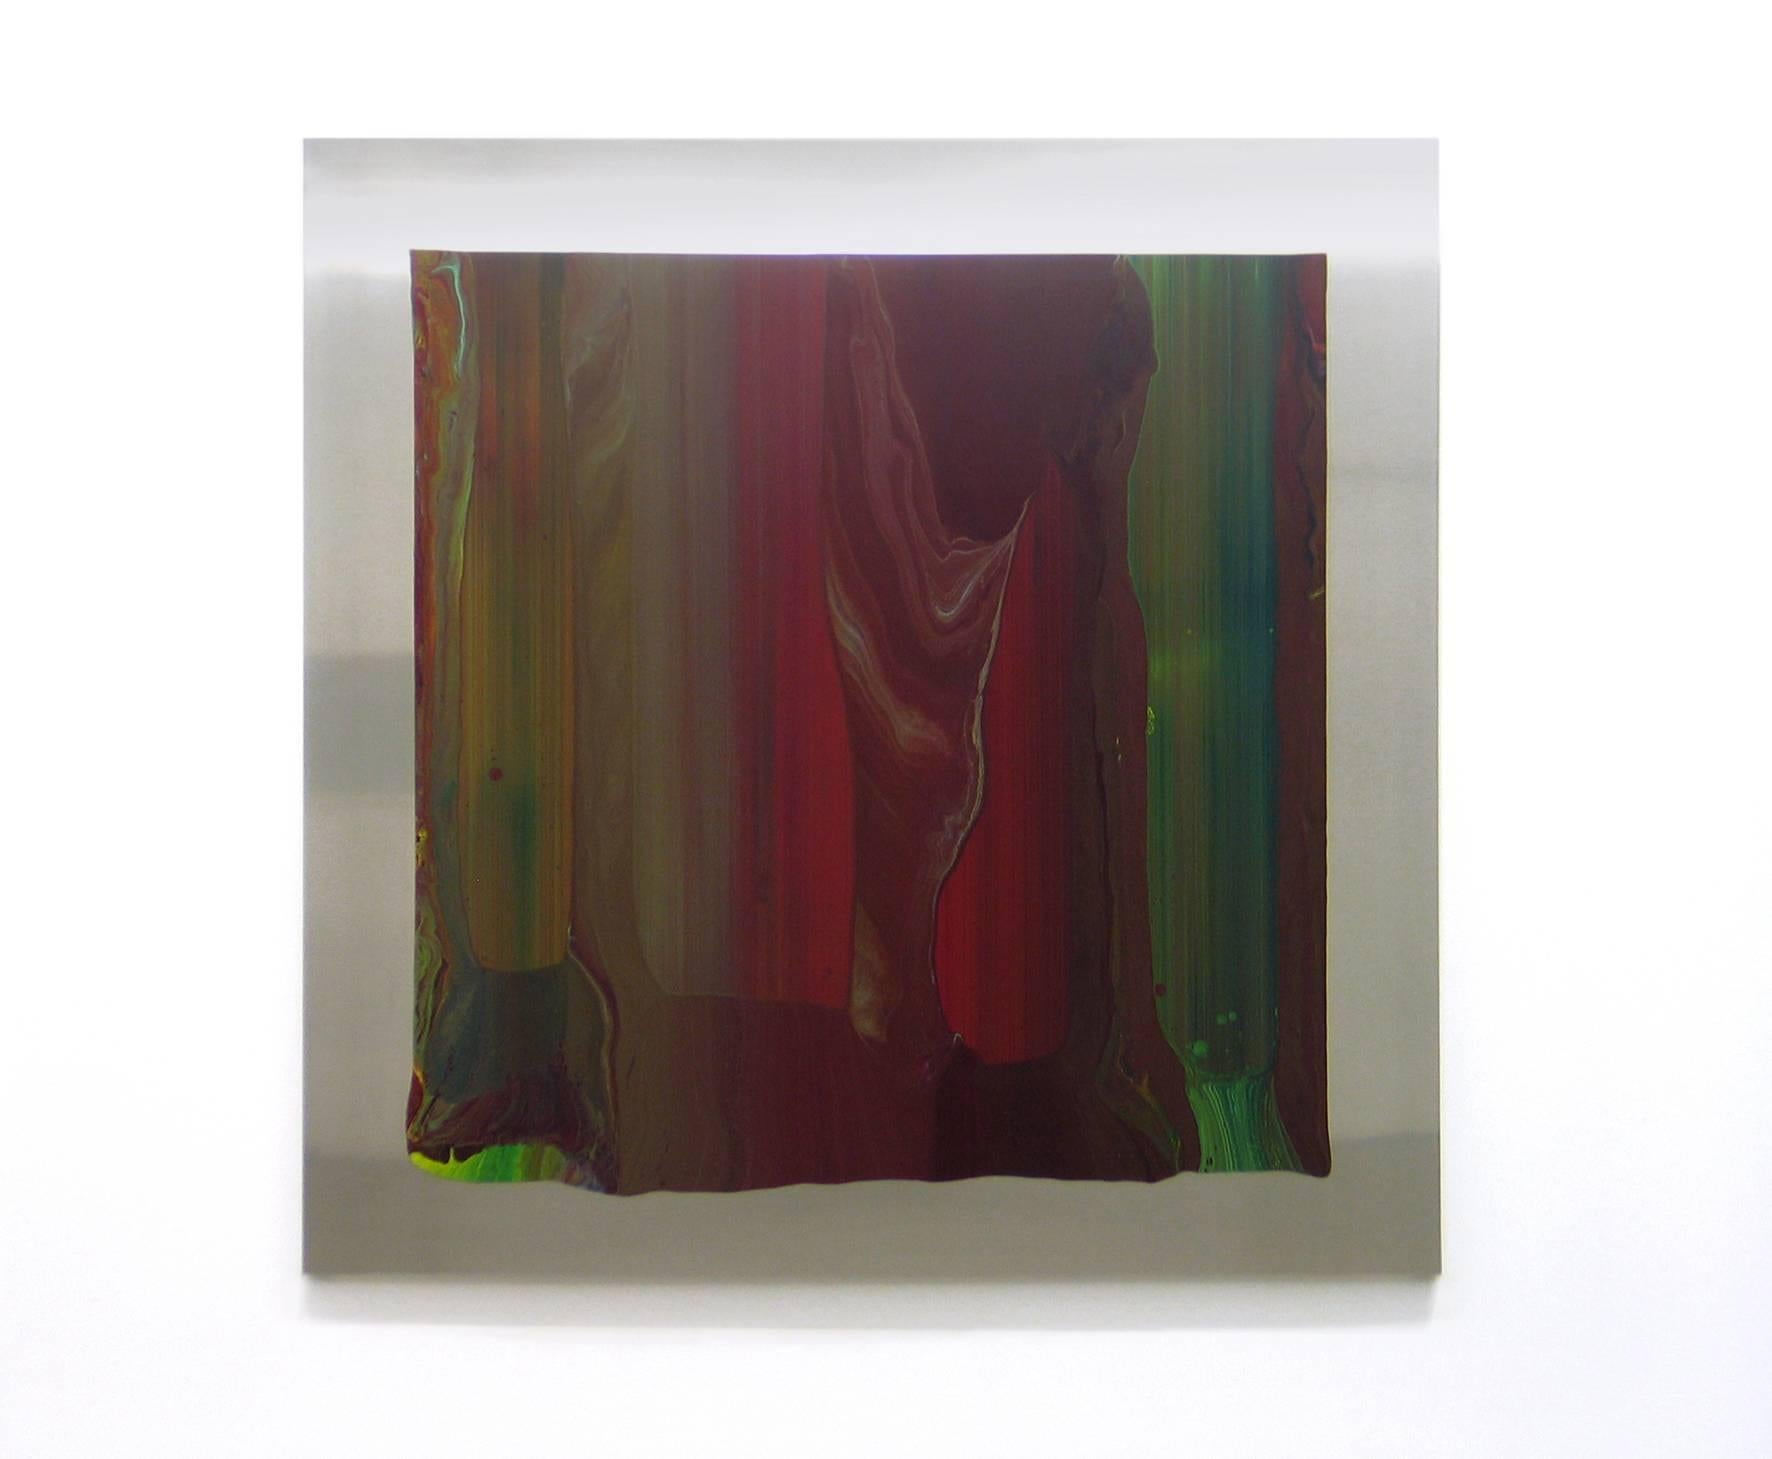 a112007-3 is a painting on aluminum by contemporary artist Ahn Hyun-Ju which is part of the “Unfolded Lines” series. In this series of abstract works, the artist works with vibrant colors in large solid areas of paint whilst conserving geometric and